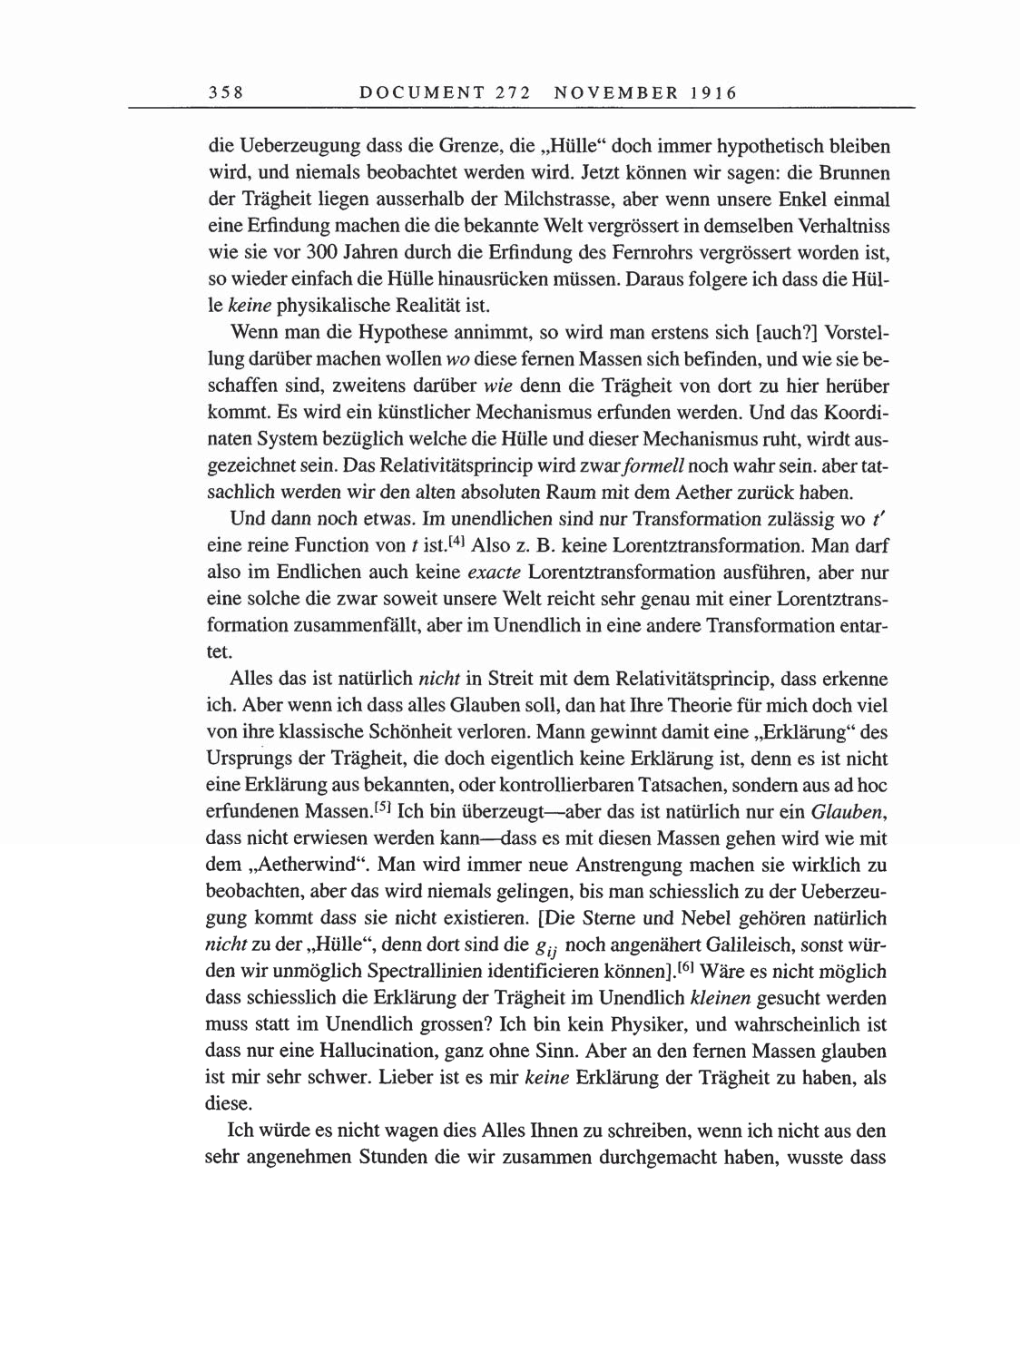 Volume 8, Part A: The Berlin Years: Correspondence 1914-1917 page 358